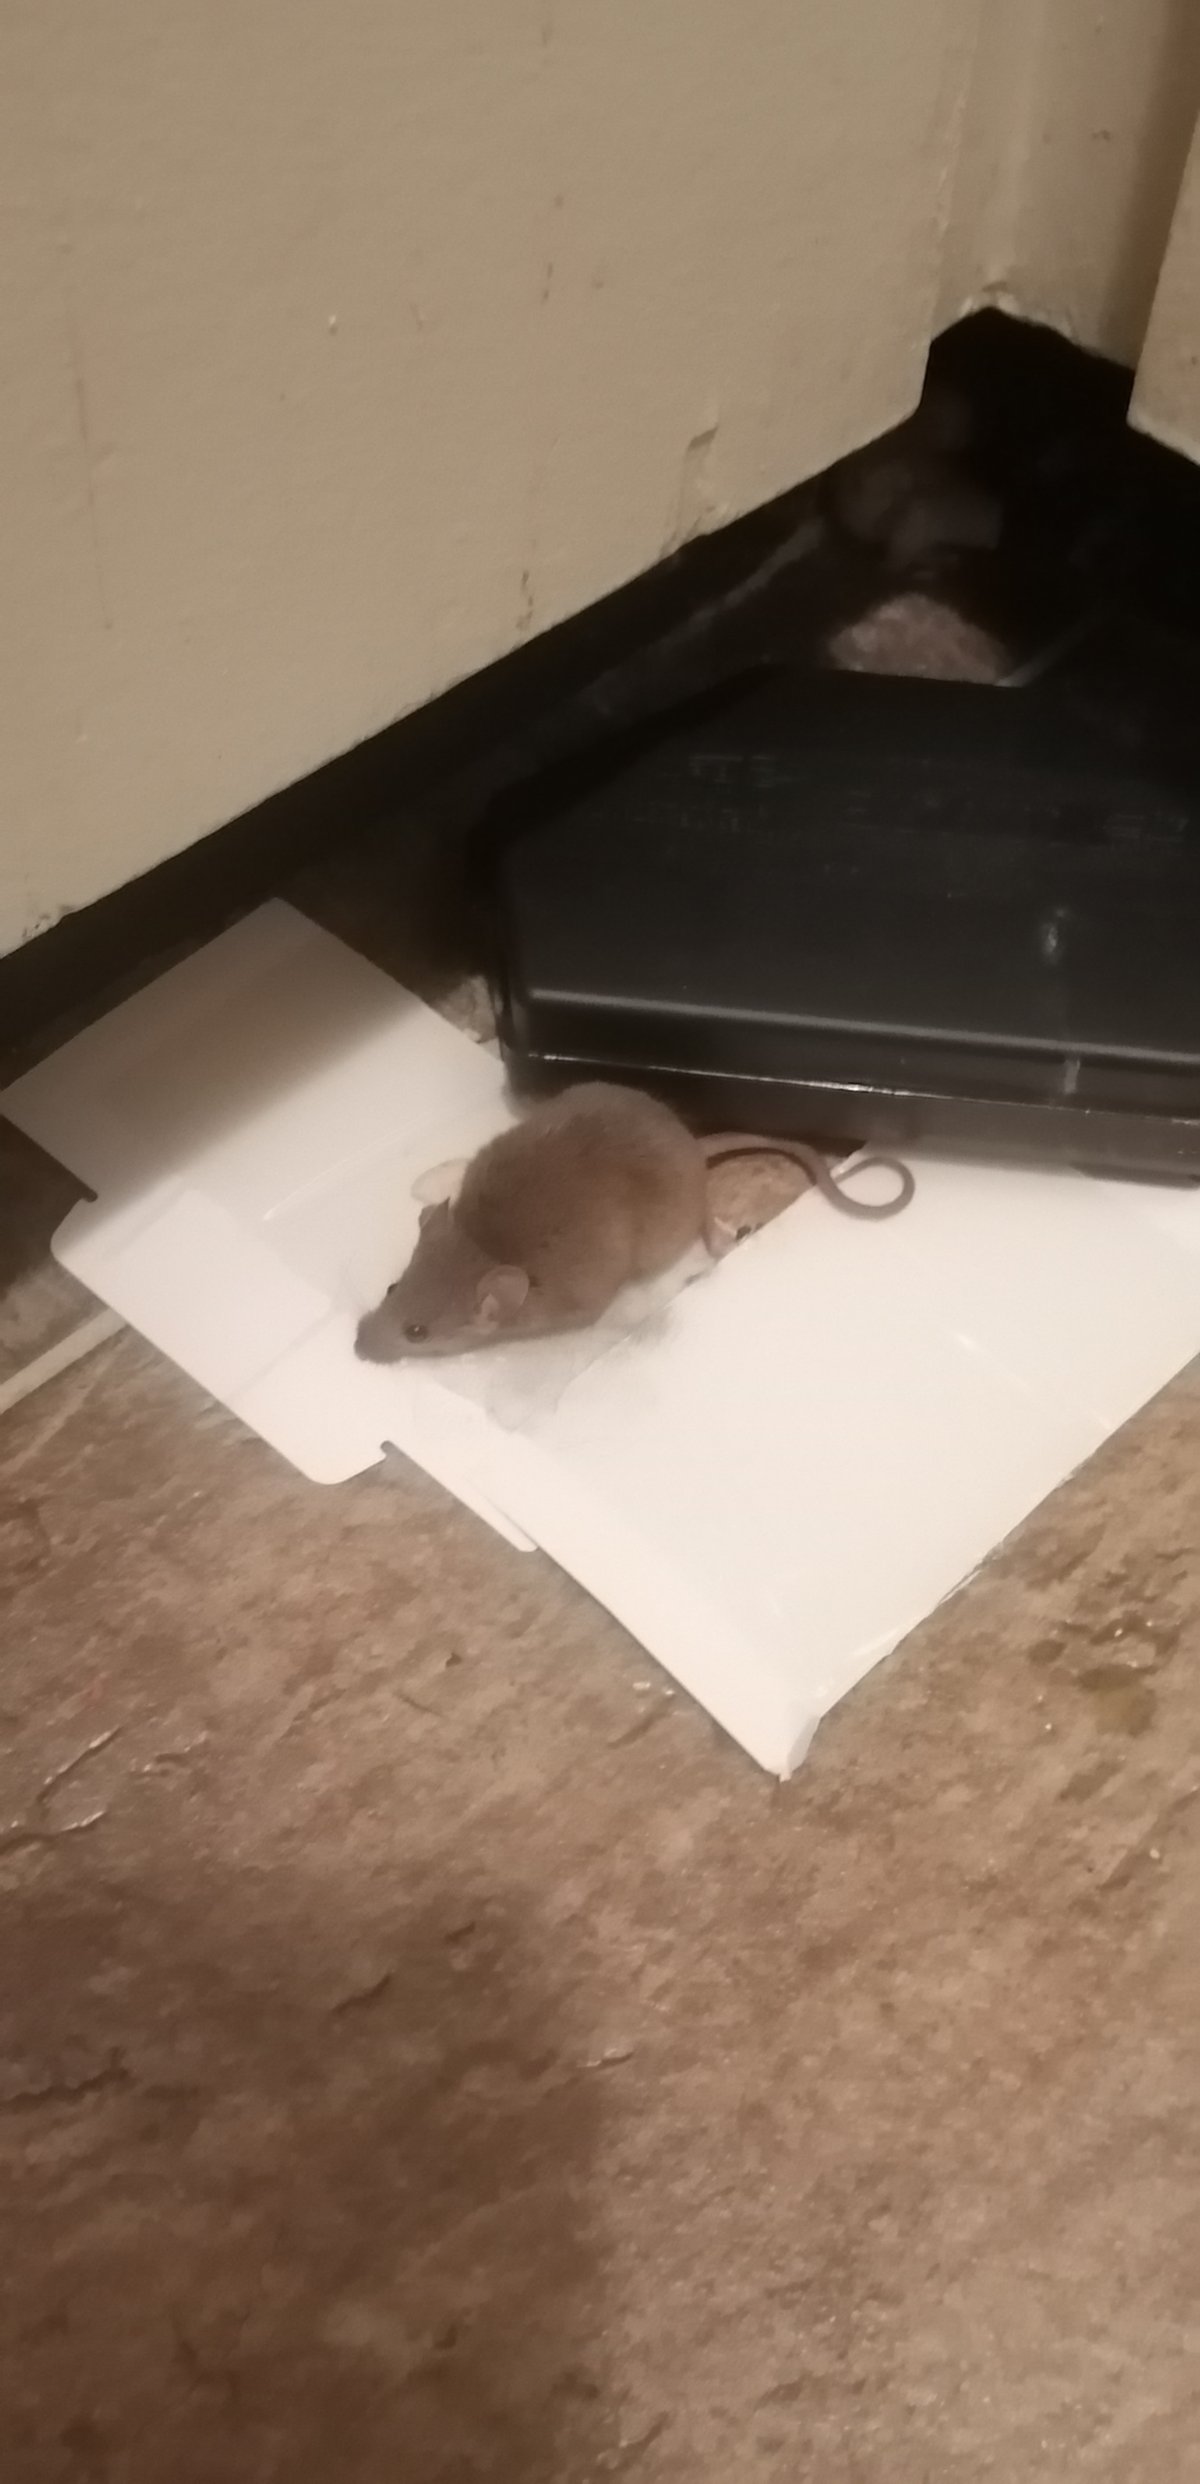 Dominika Kosowska says she's been dealing with mice in her Saskatoon apartment for years.